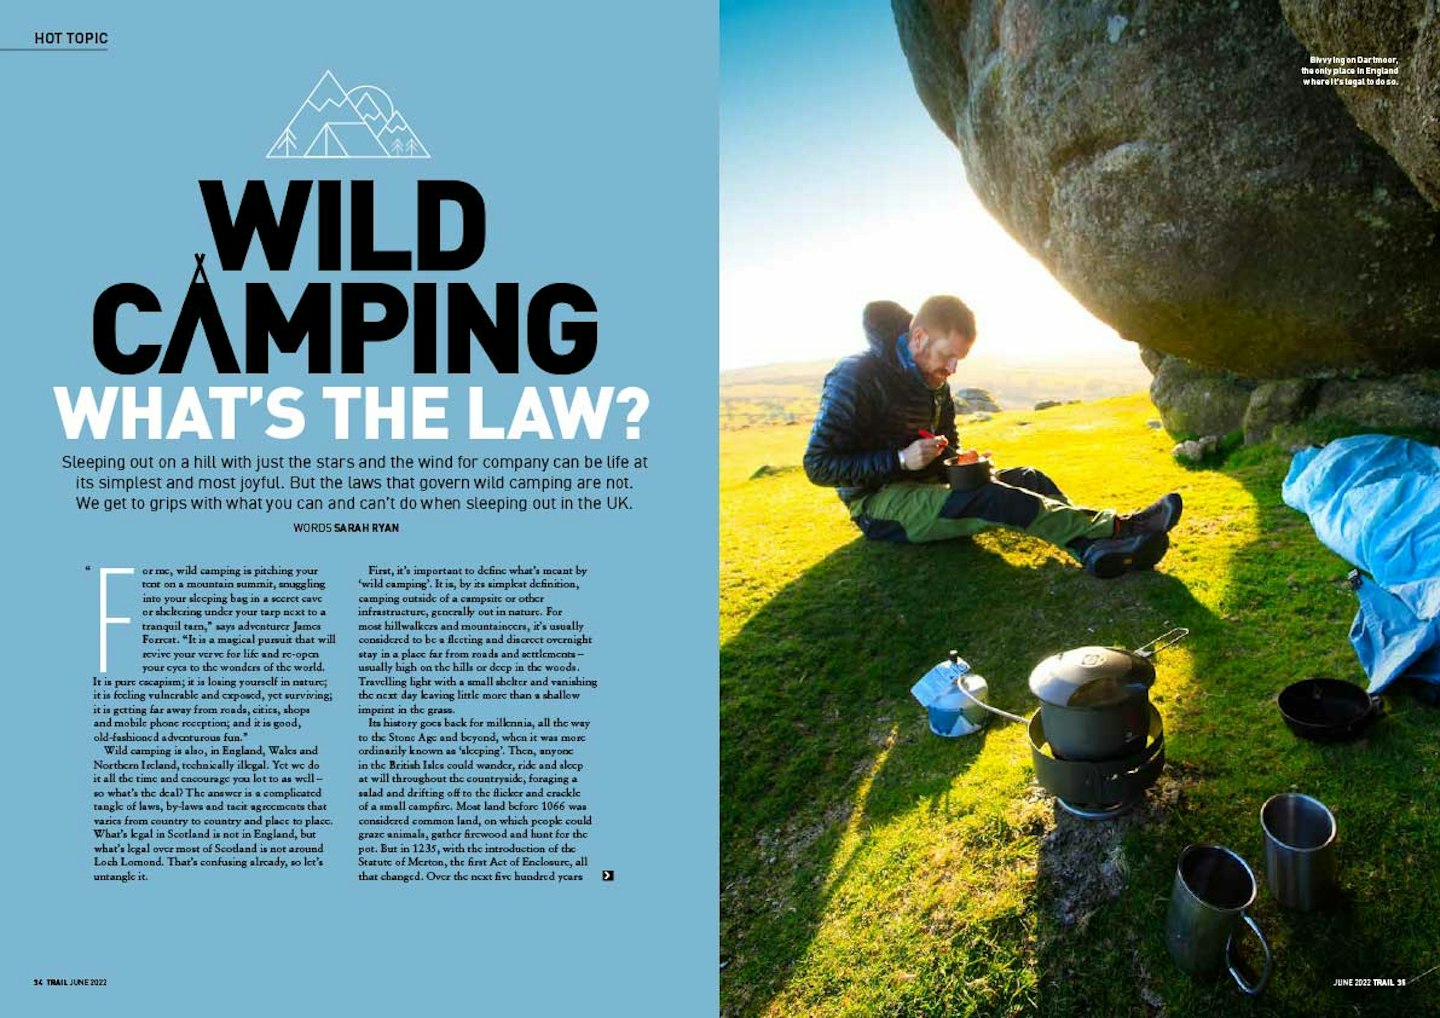 Trail magazine article - Wild camping - what's the law?